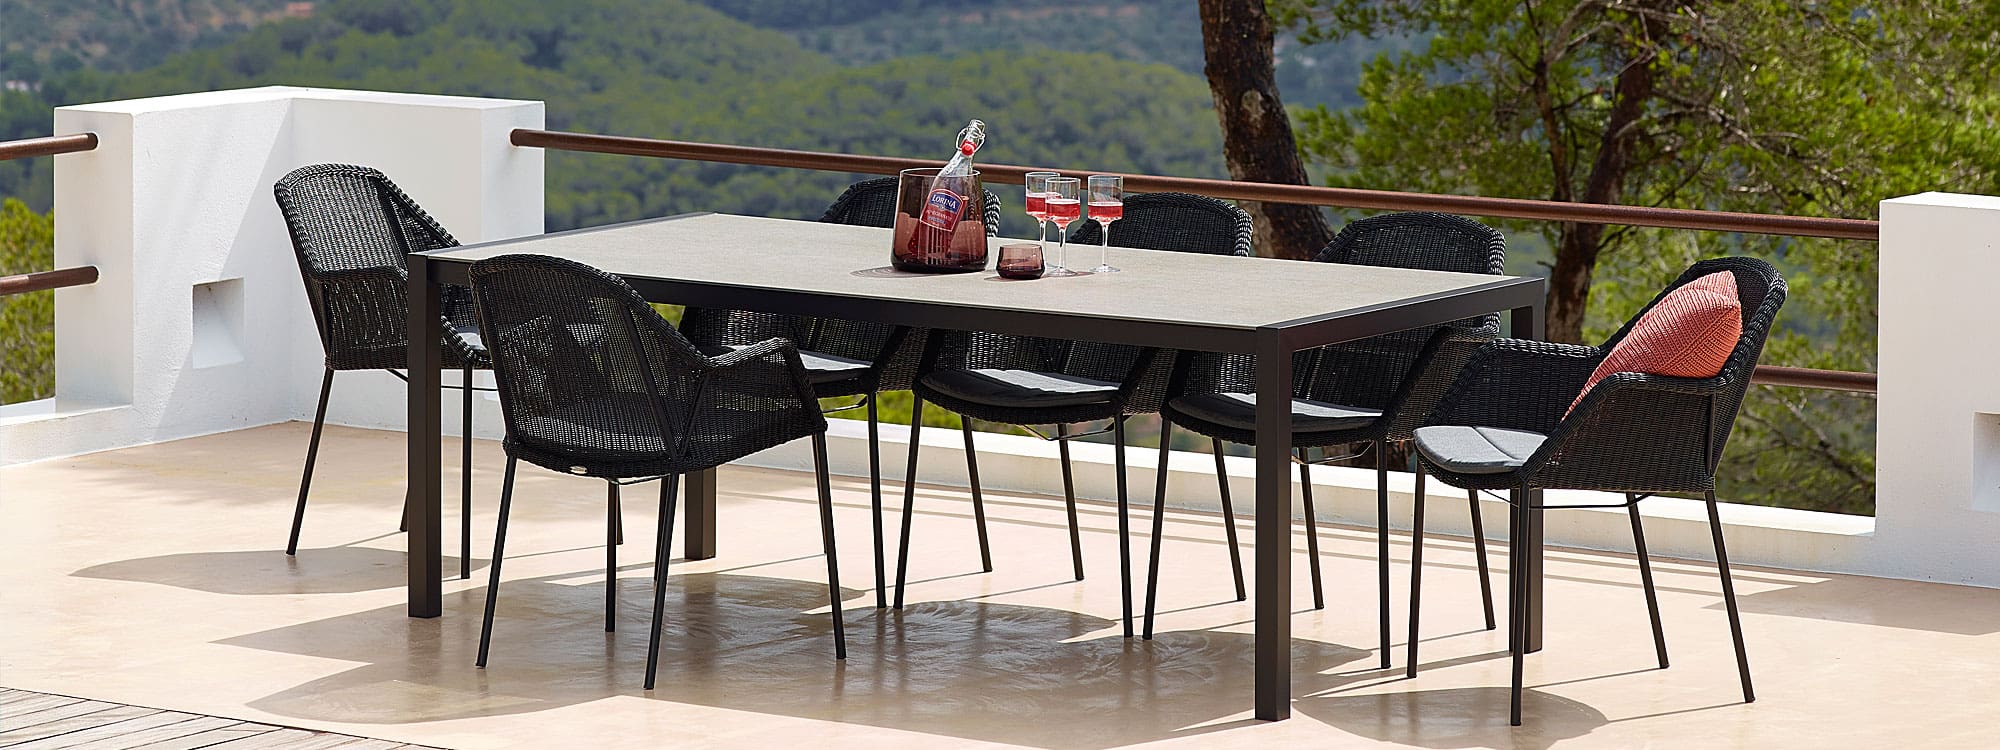 Image of black Cane-line Breeze stacking garden chairs around a dining table with 3 glasses of rose wine and wine bottle on table top